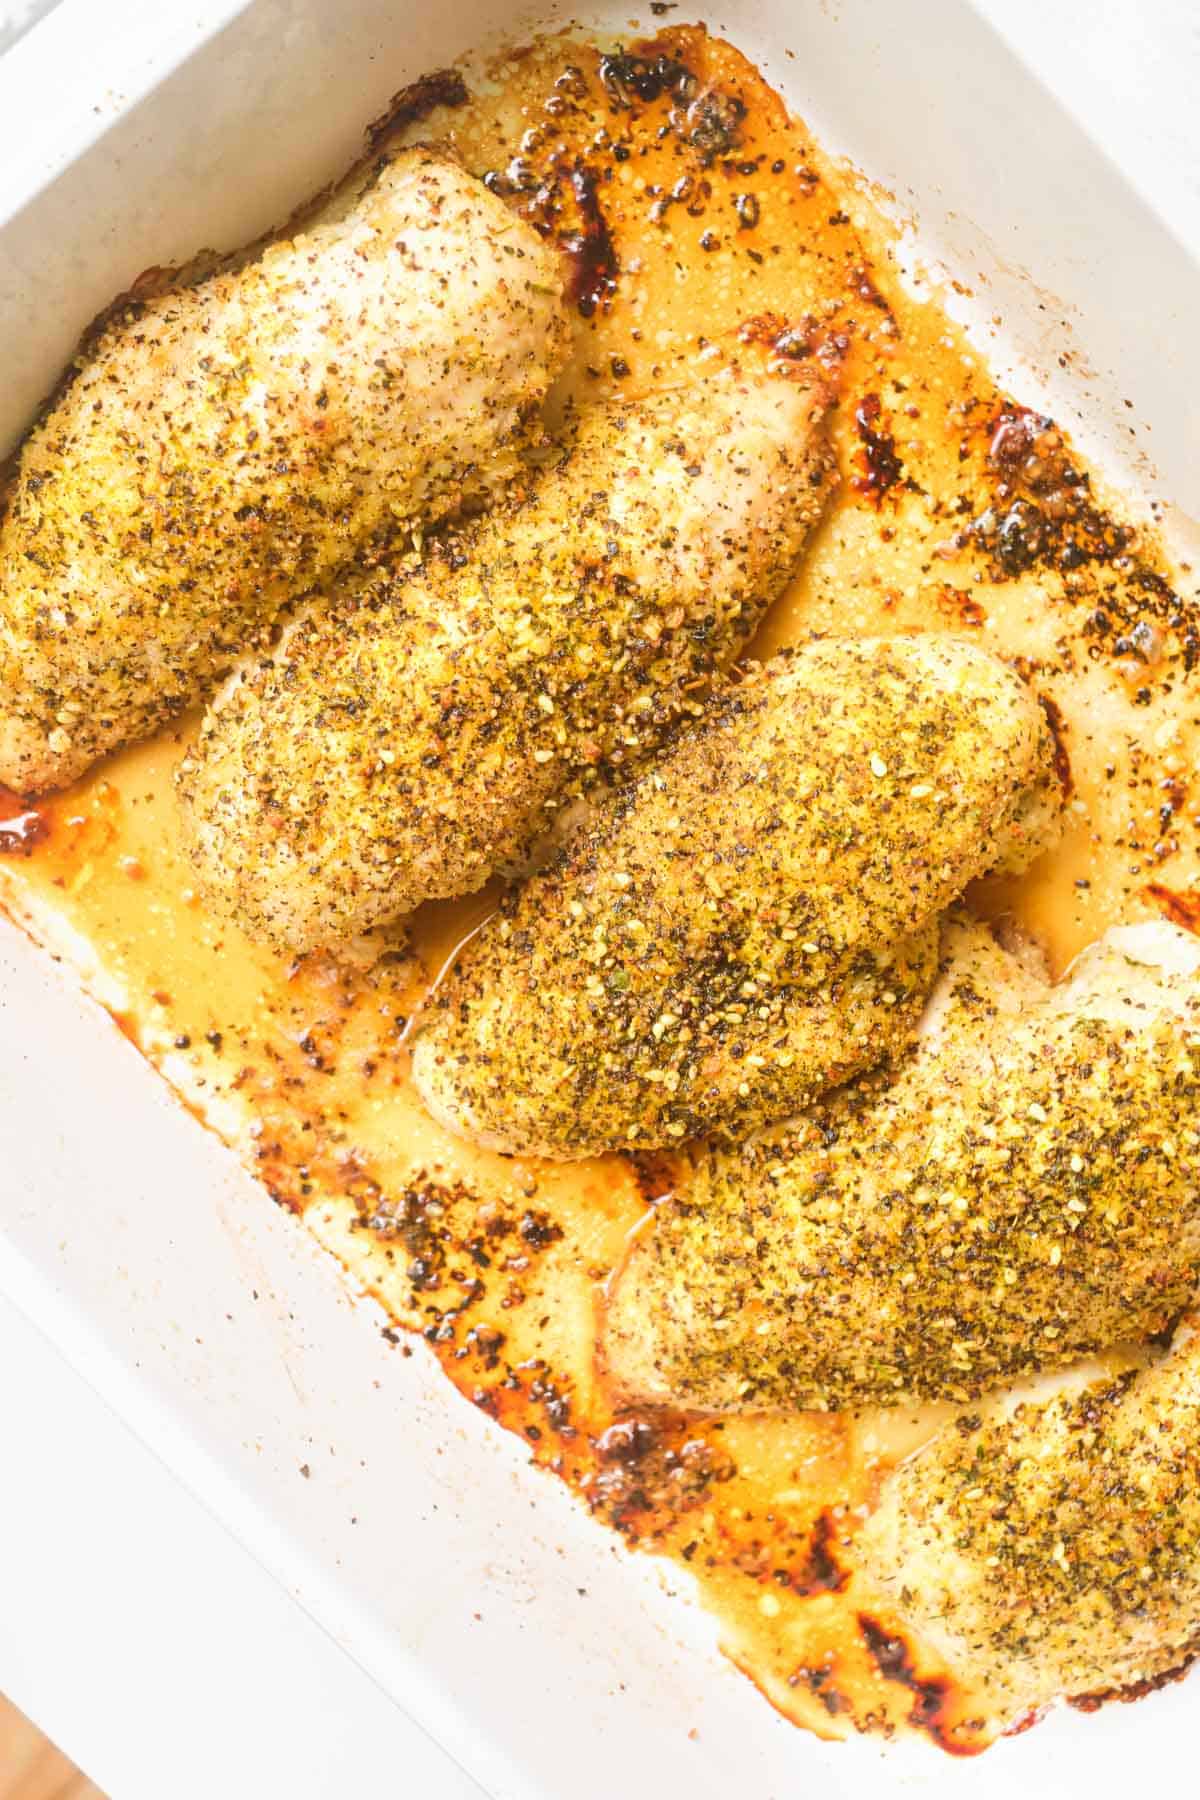 the completed lemon pepper chicken breast in a baking dish